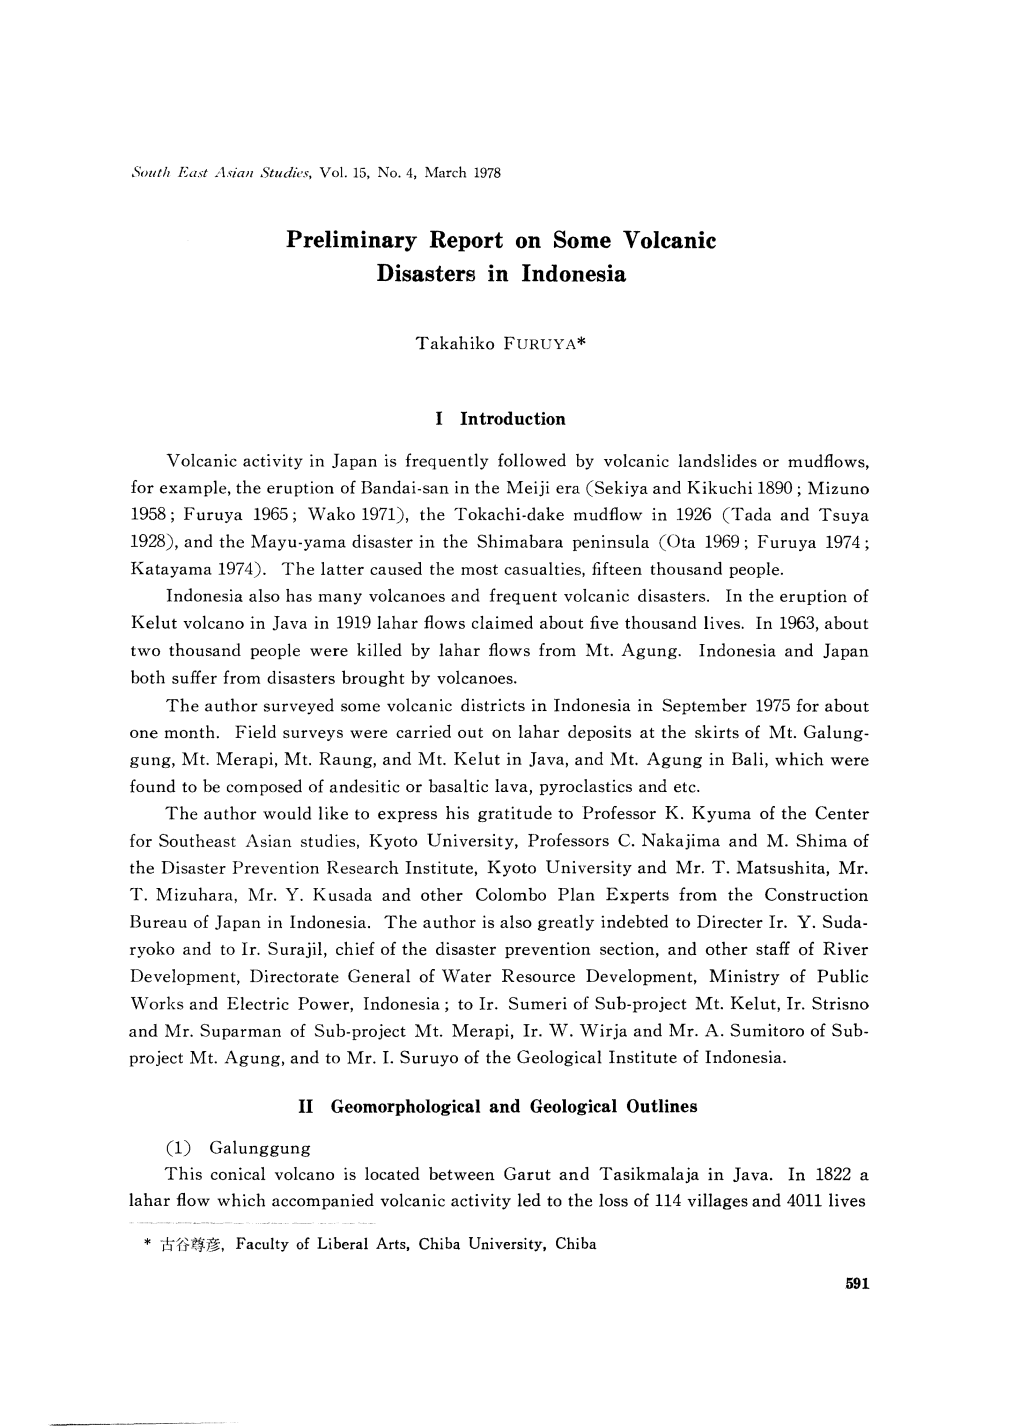 Preliminary Report on Some Volcanic Disasters in Indonesia